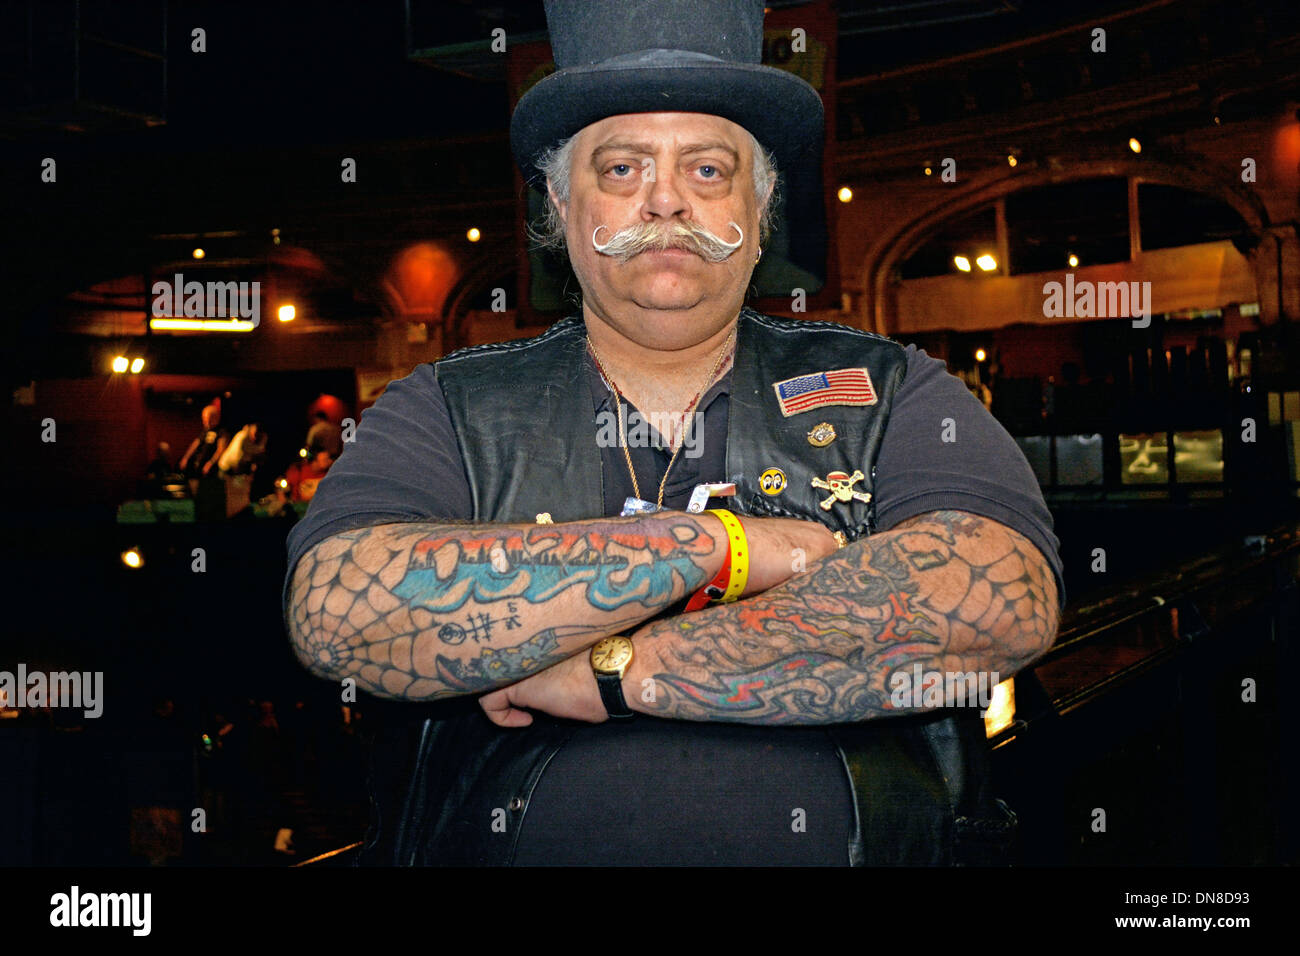 A man with multiple tattoos at the 16th Annual New York City Tattoo Convention at Roseland Ballroom in MIdtown Manhattan. Stock Photo